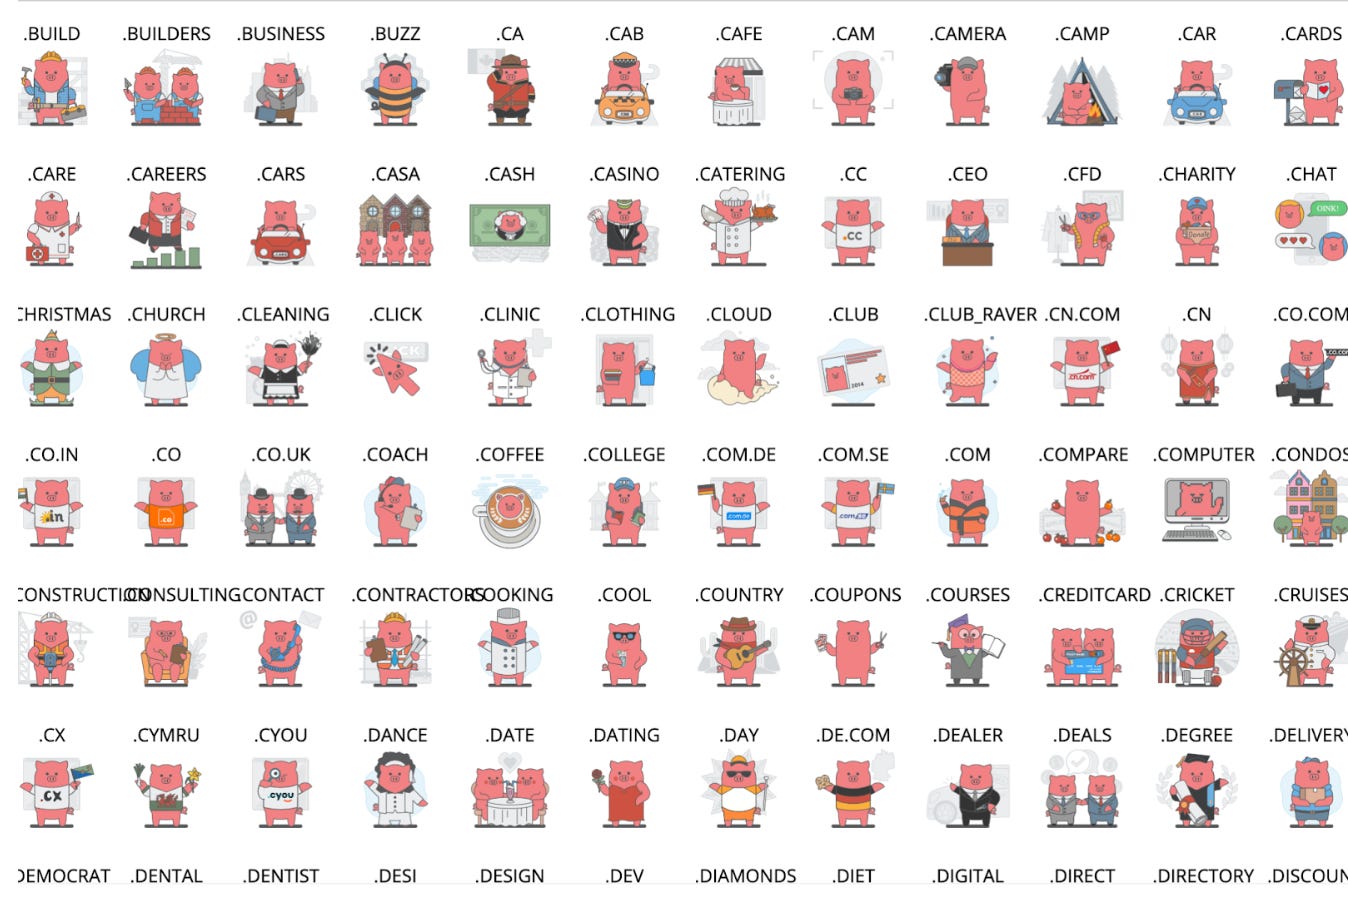 Porkbun created a unique piglet for each type of domain they support. And boy, are there a lot of little piggies! Source: Porkbun’s “Awesomeness” page